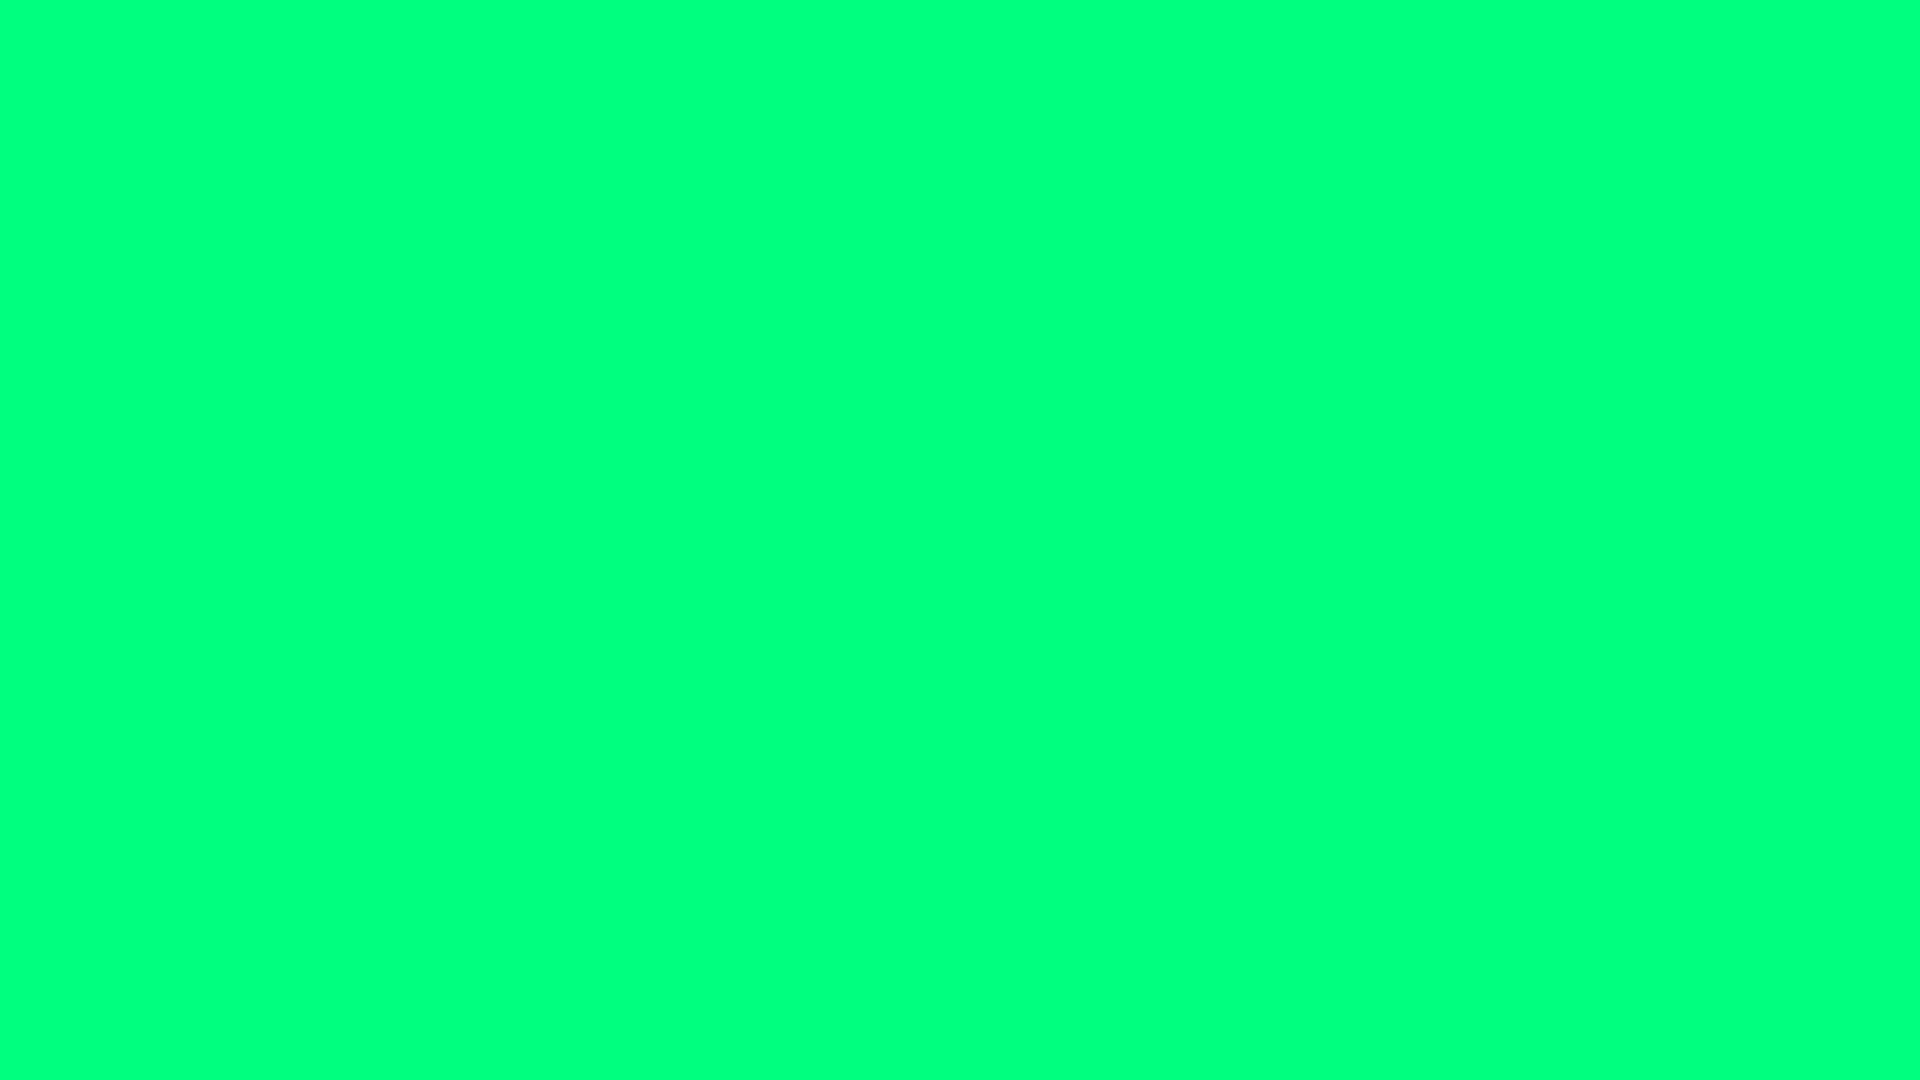 https://htmlcolorcodes.com/assets/images/colors/spring-green-color-solid-background-1920x1080.png